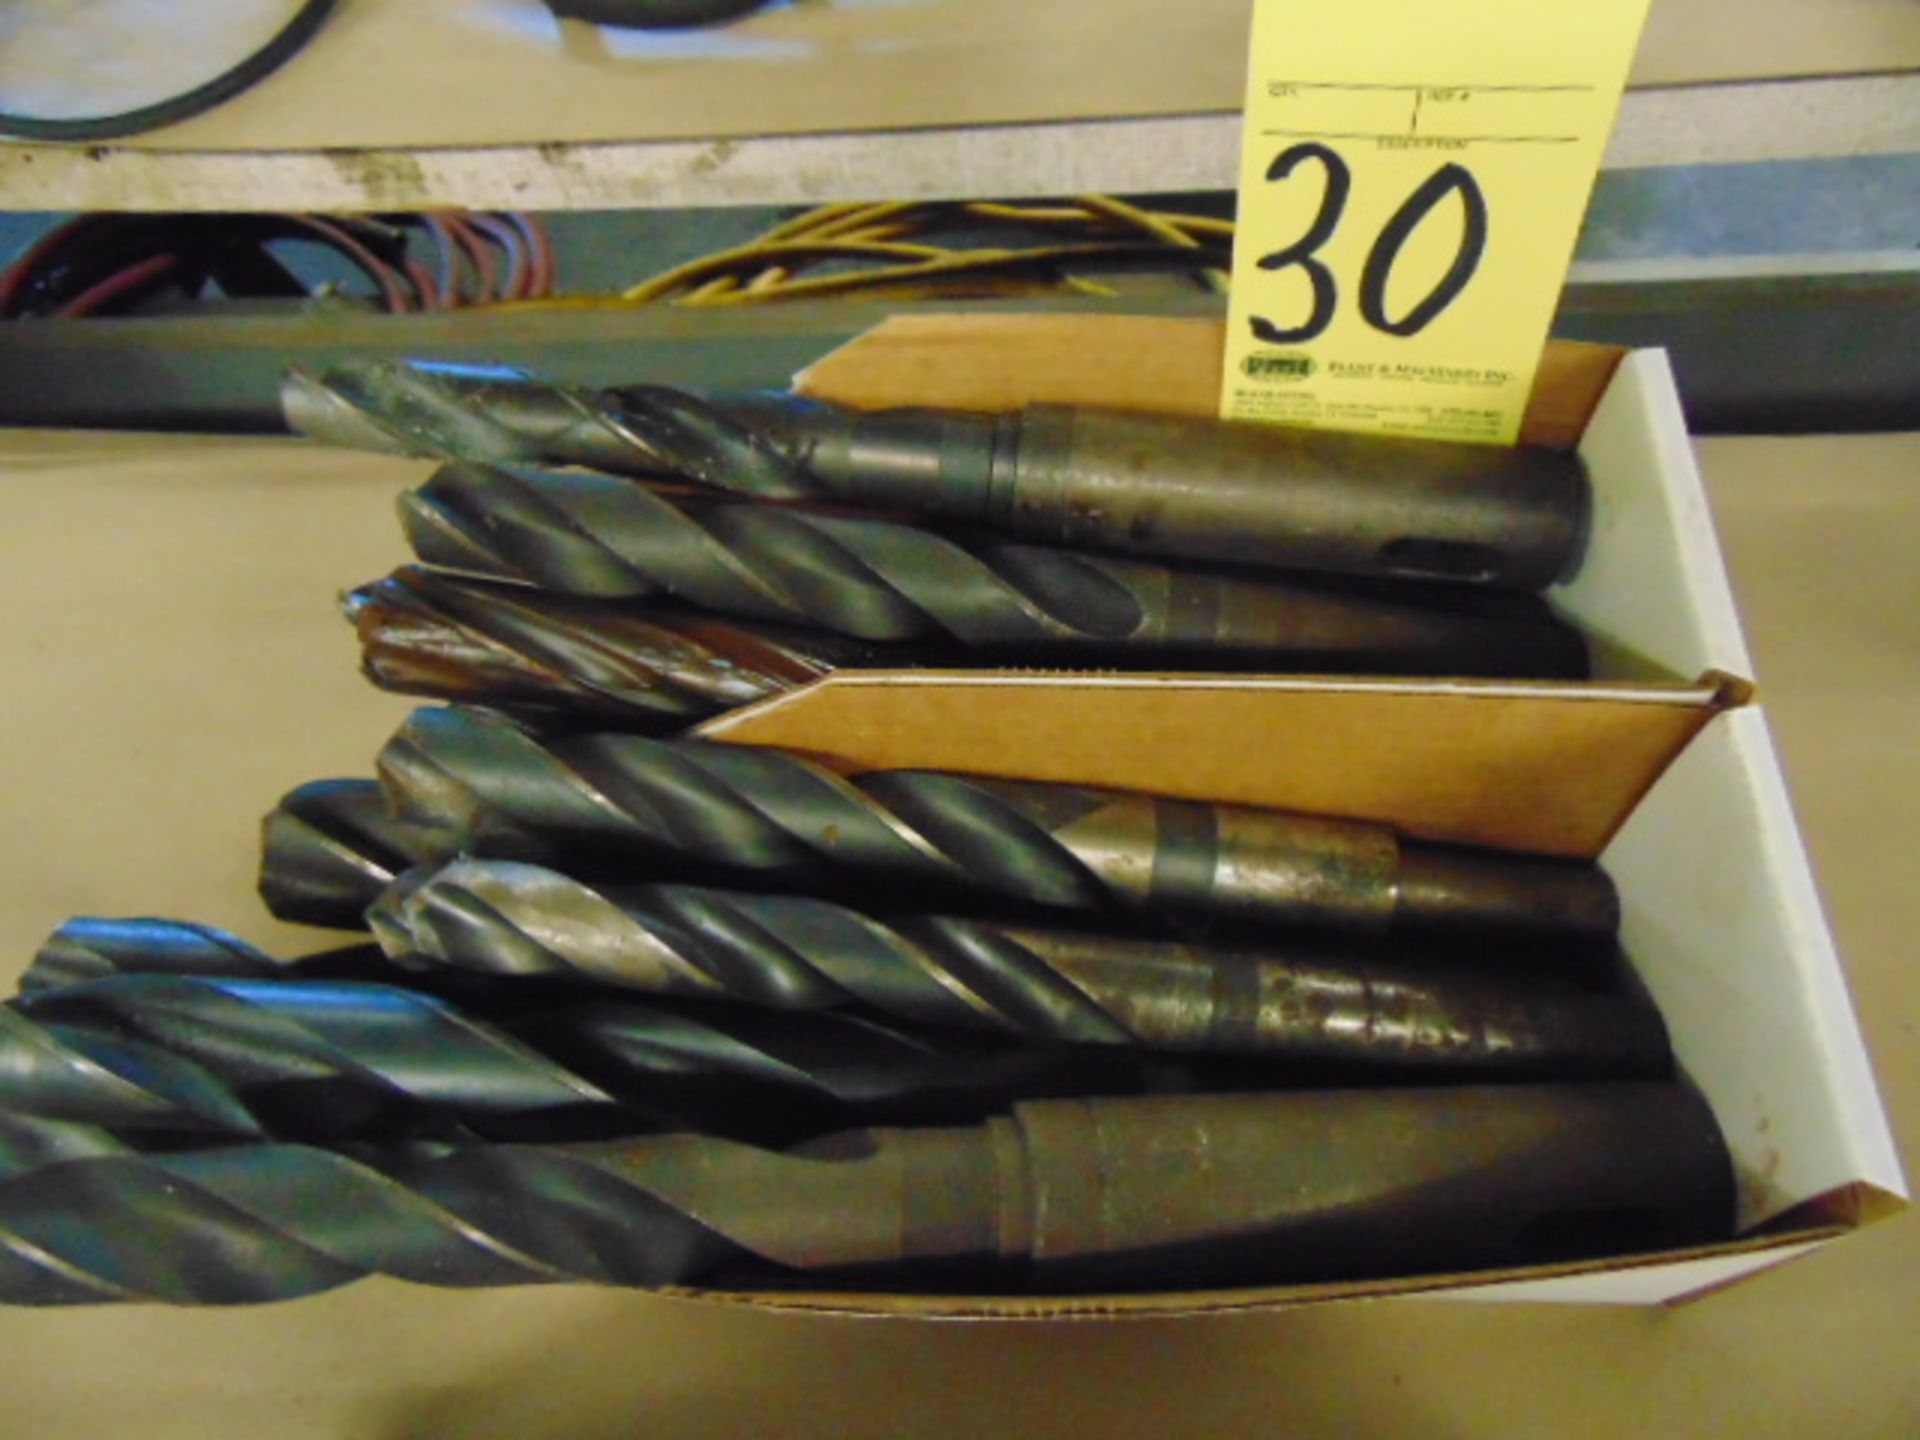 LOT OF TAPER SHANK DRILLS (in two boxes)